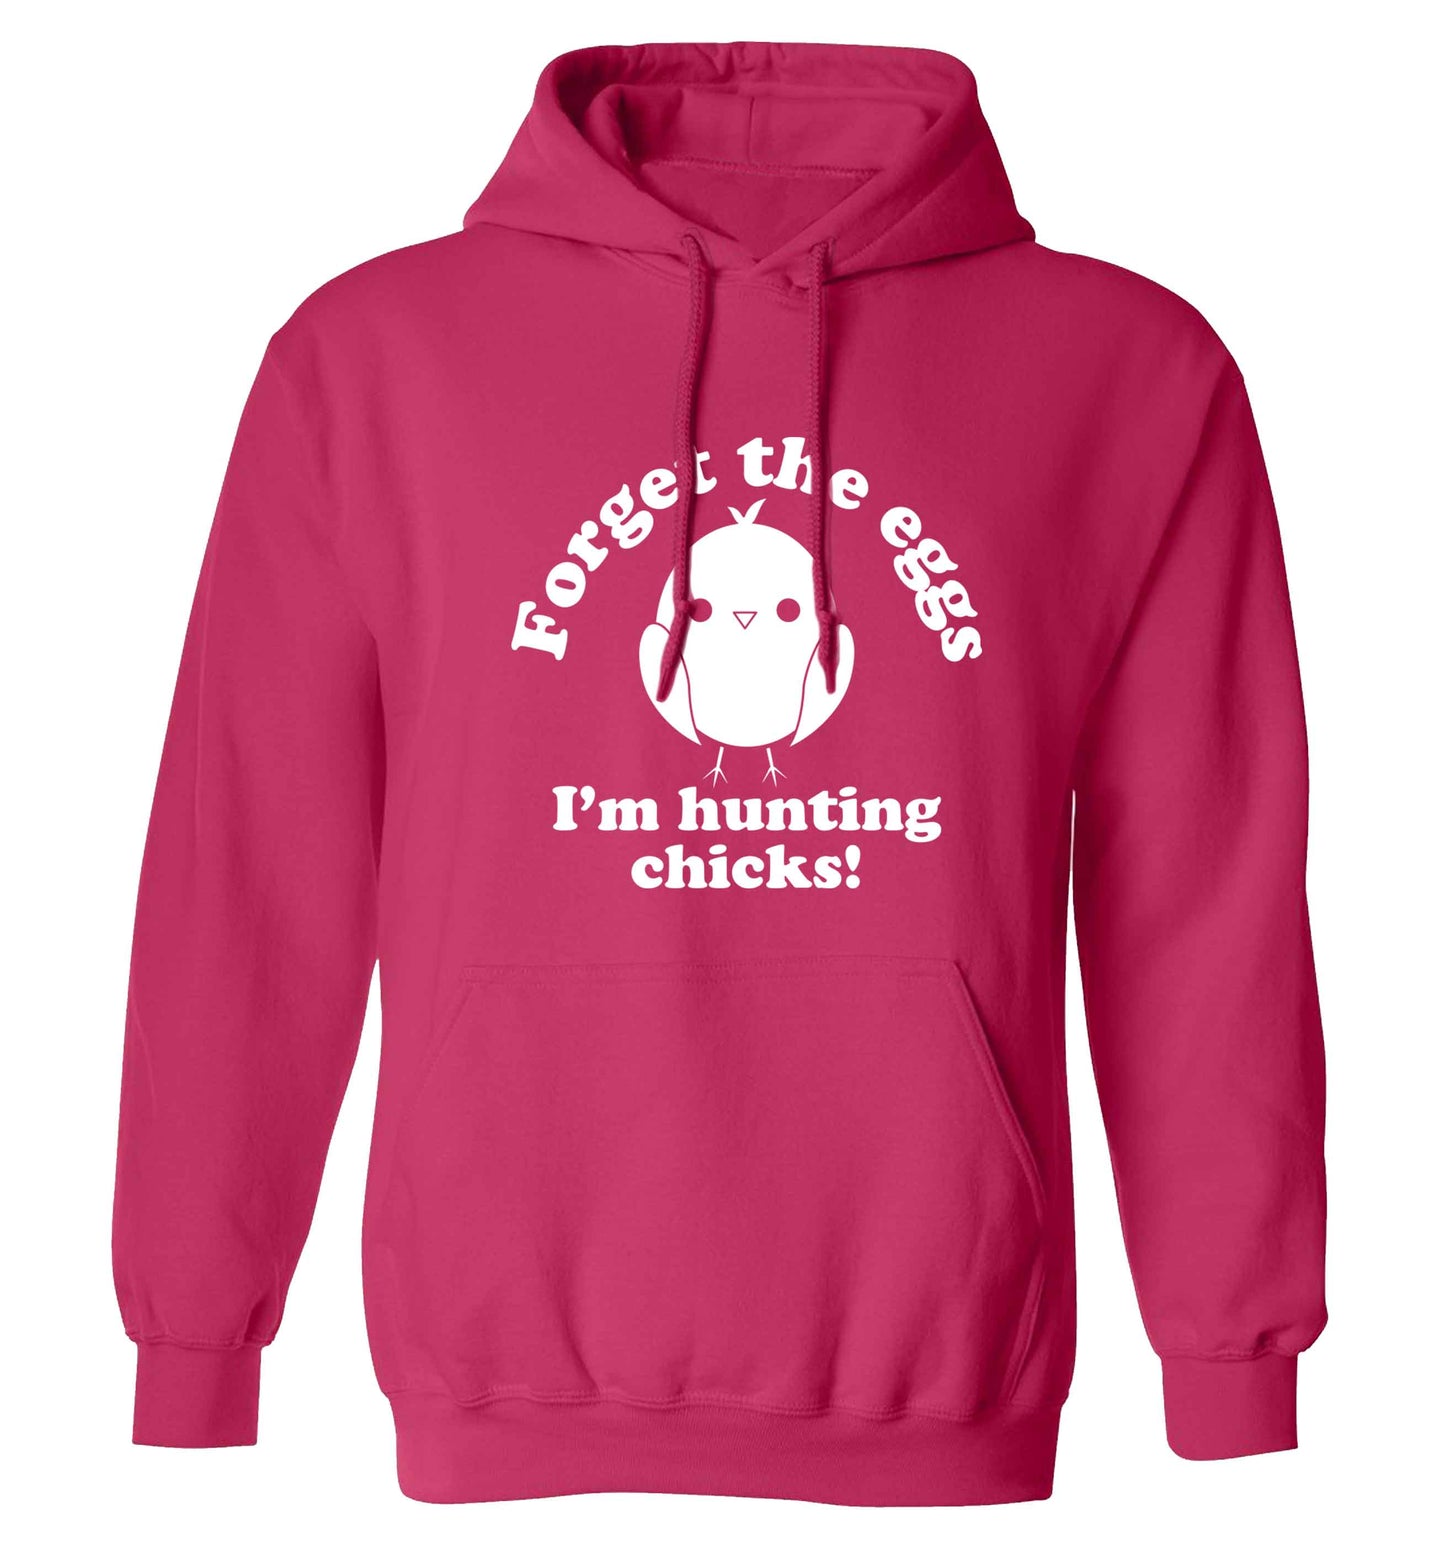 Forget the eggs I'm hunting chicks! adults unisex pink hoodie 2XL